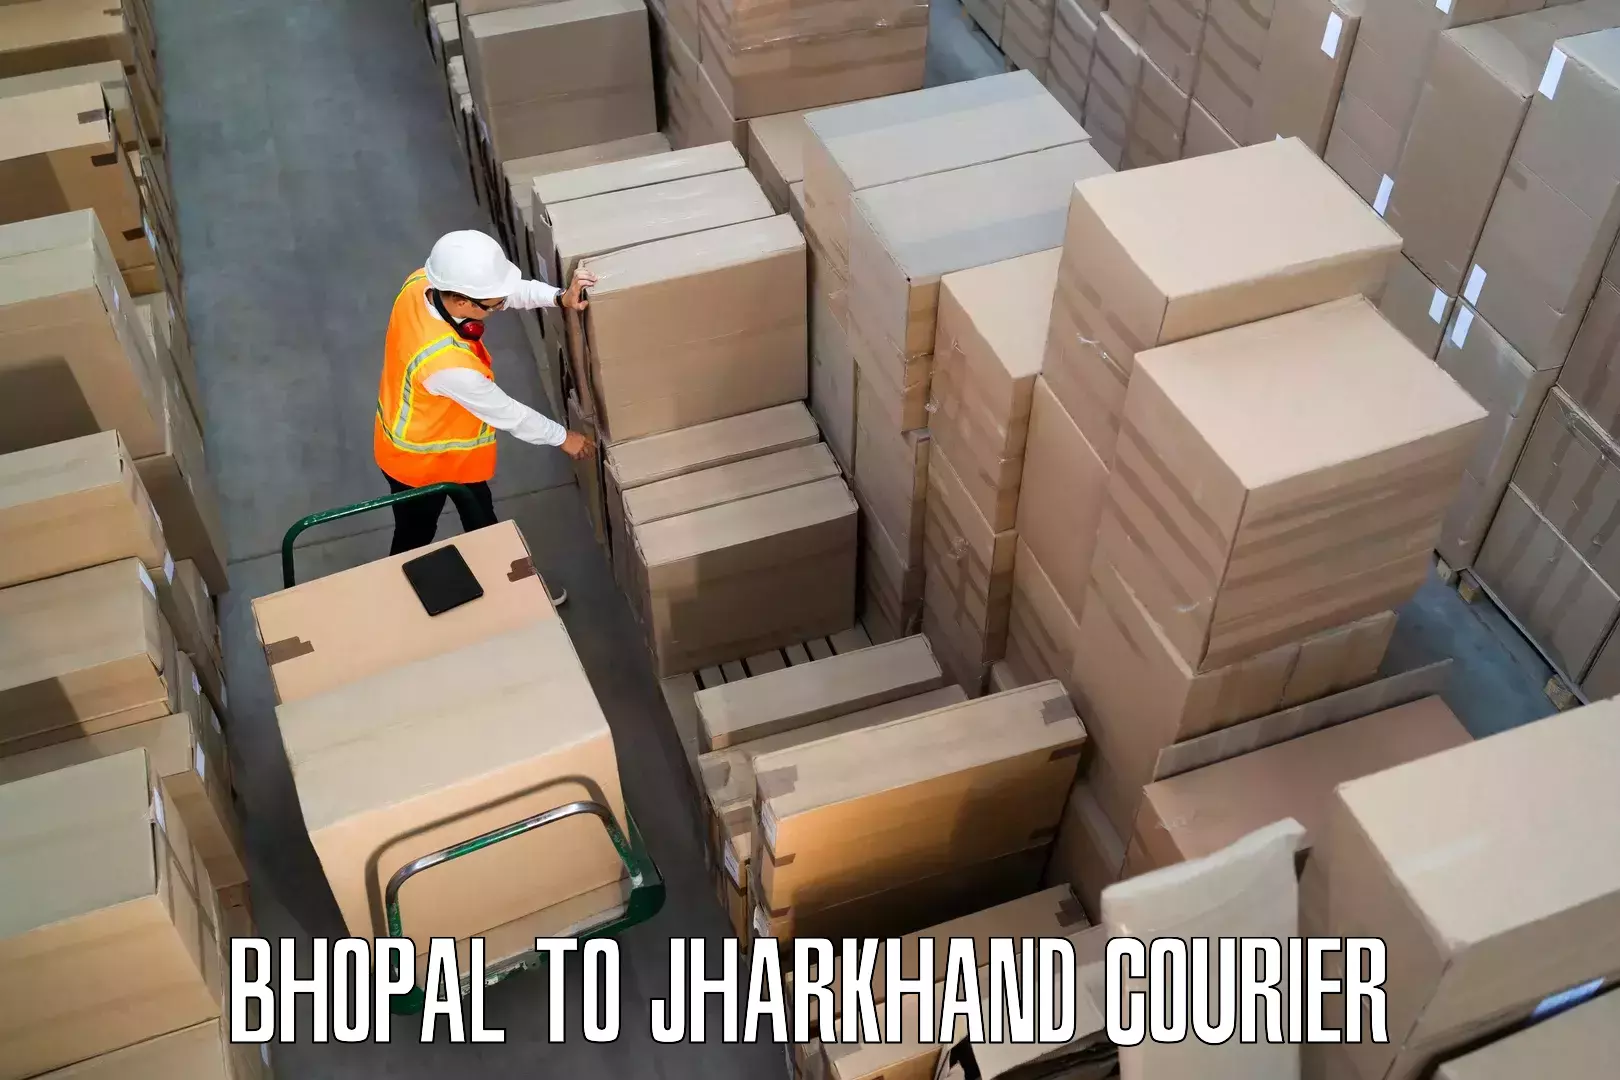 Furniture transport specialists Bhopal to Dhalbhumgarh